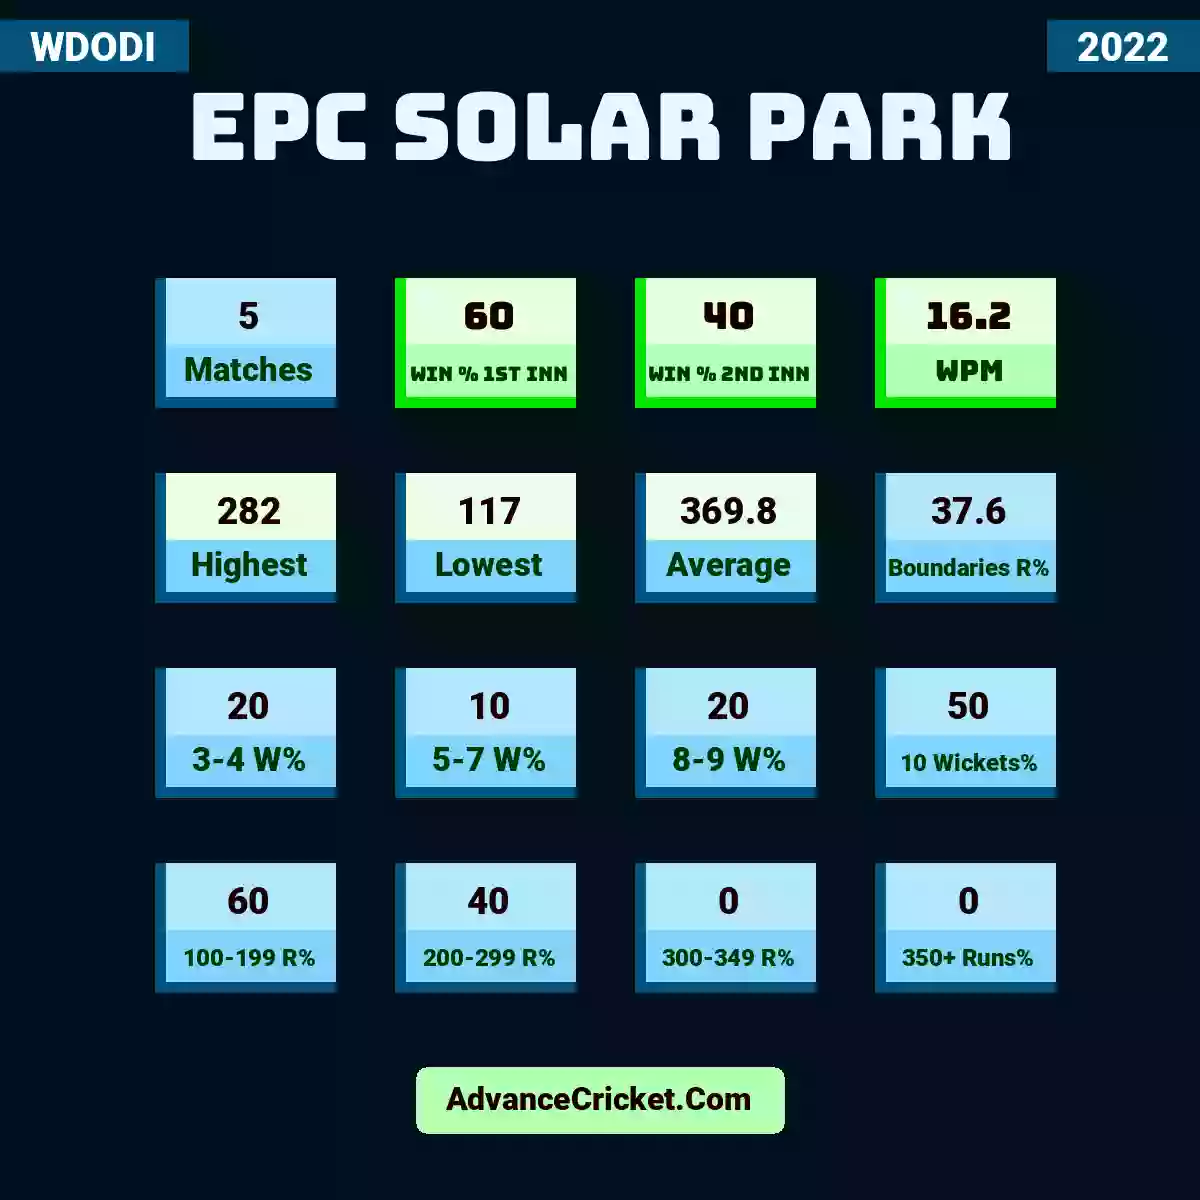 Image showing EPC Solar Park with Matches: 5, Win % 1st Inn: 60, Win % 2nd Inn: 40, WPM: 16.2, Highest: 282, Lowest: 117, Average: 369.8, Boundaries R%: 37.6, 3-4 W%: 20, 5-7 W%: 10, 8-9 W%: 20, 10 Wickets%: 50, 100-199 R%: 60, 200-299 R%: 40, 300-349 R%: 0, 350+ Runs%: 0.